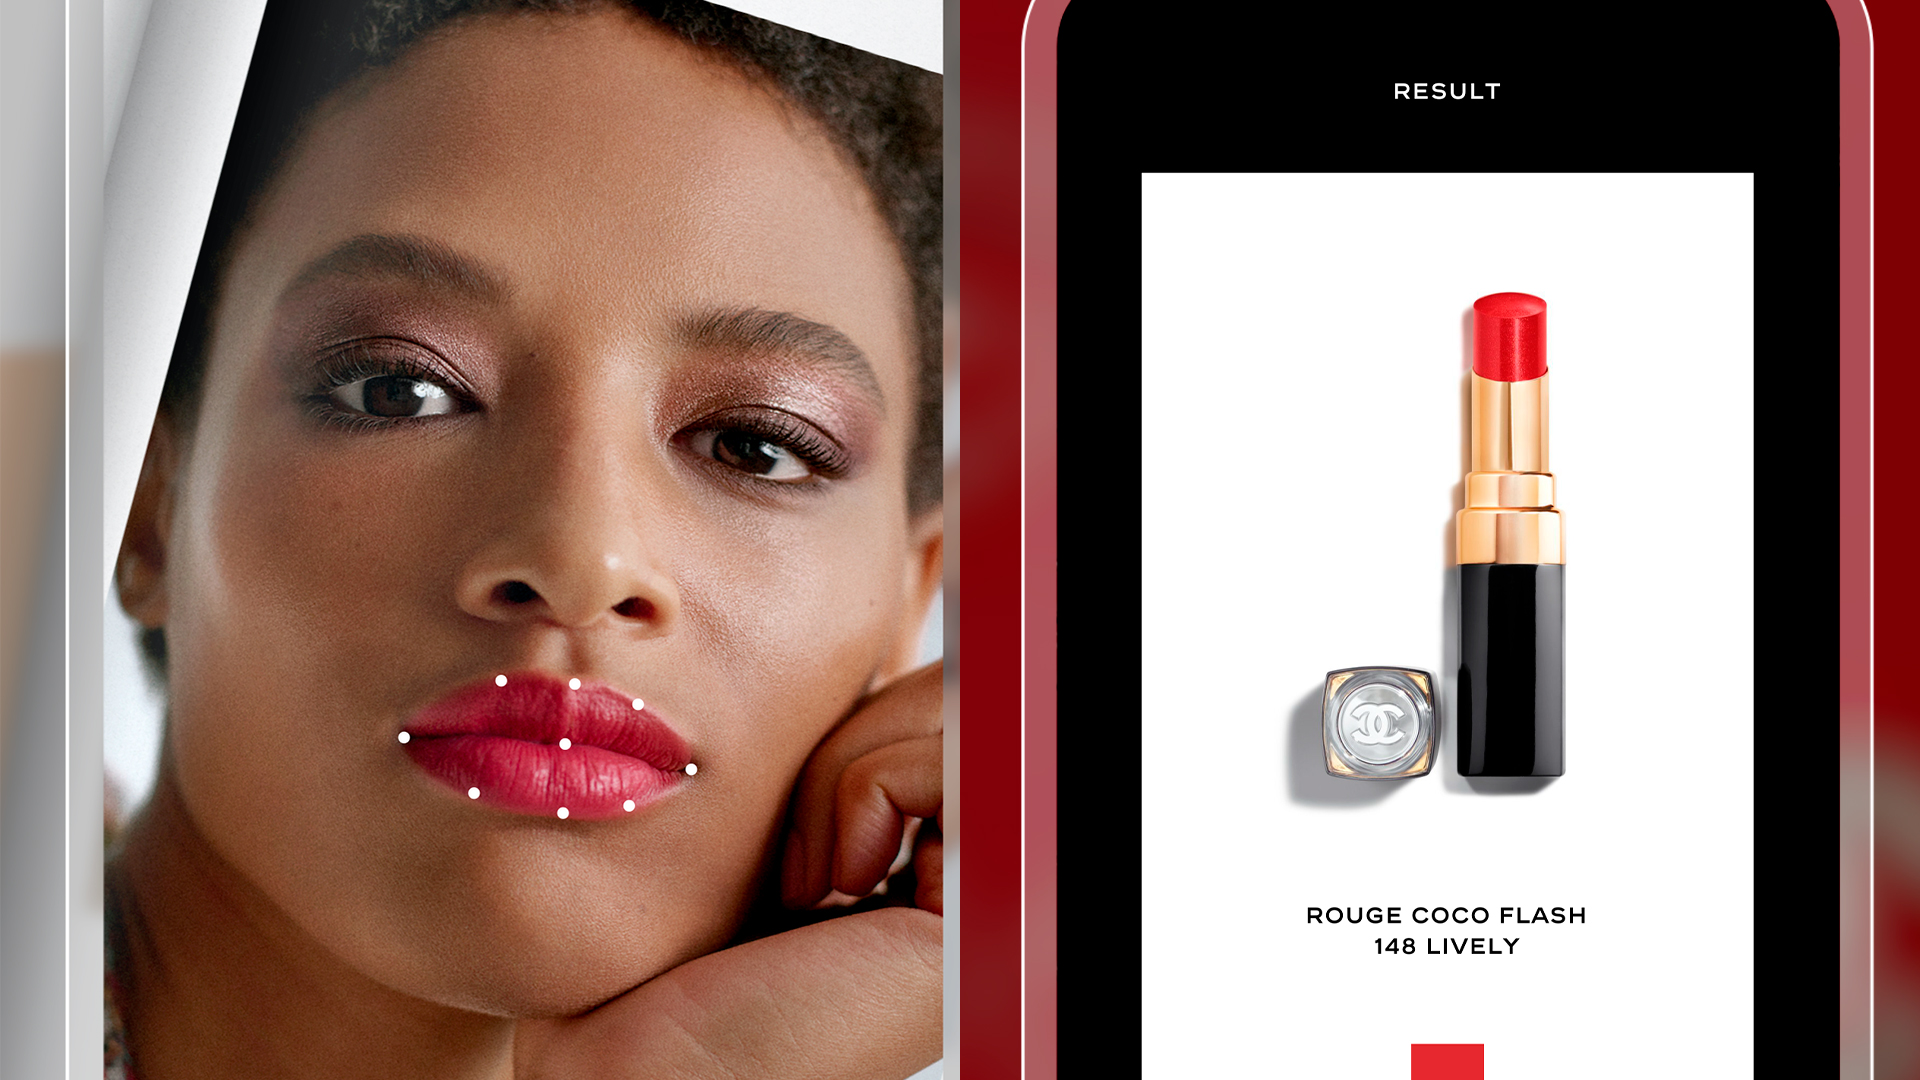 Fancy a color? Chanel's Lipscanner app will match a lipstick from any image  for you - Luxurylaunches